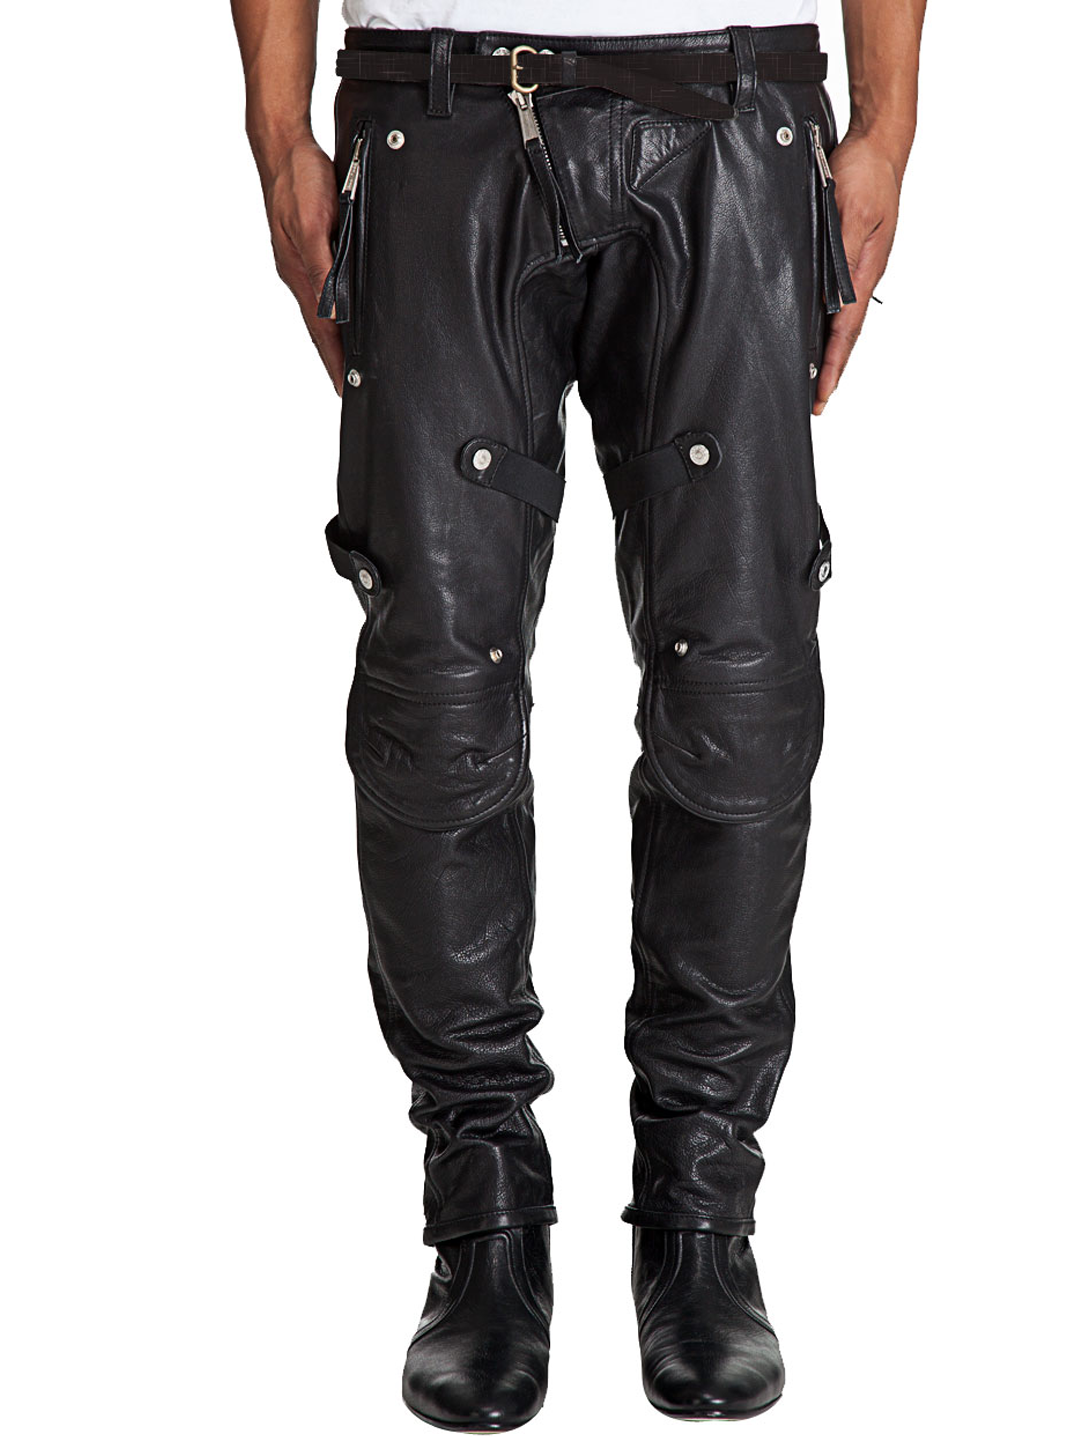 MEN LEATHER PANTS CASUAL SLIM FIT SKIN TIGHT REAL LAMB LEATHER PANT ...